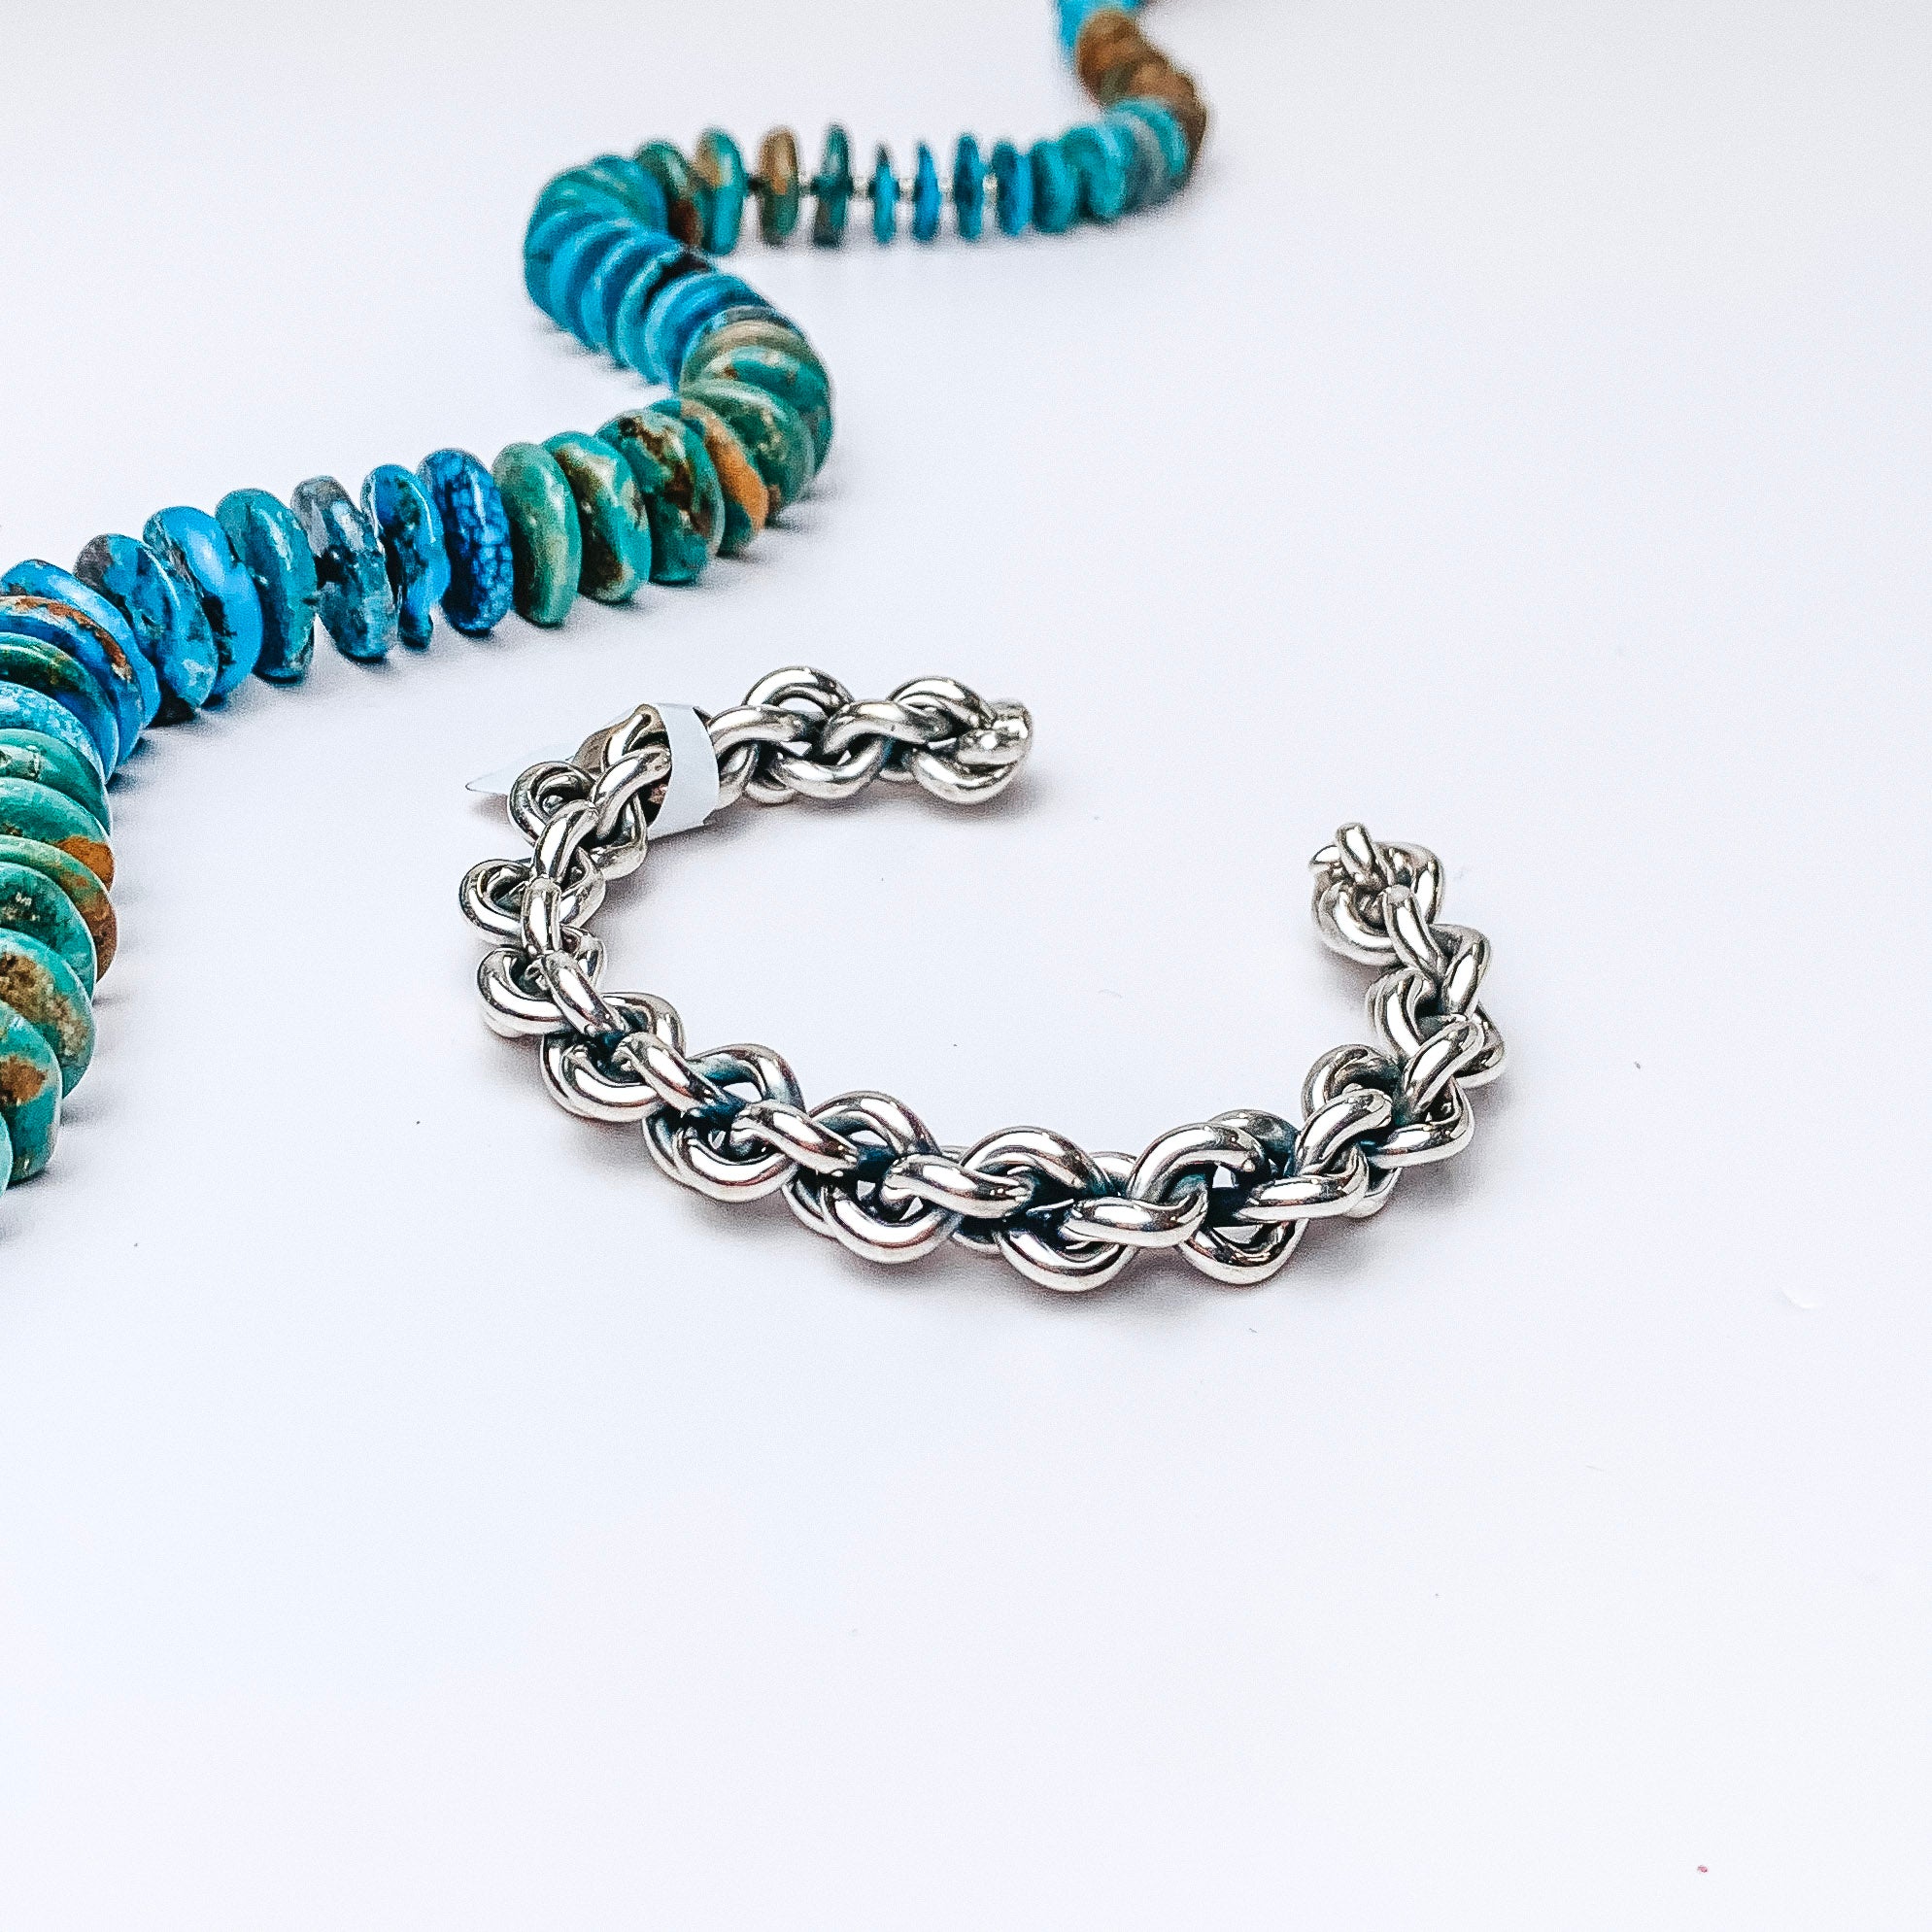 Centered in the picture is a sterling silver braided cuff. A turquoise necklace is laid above the cuff, all on a white background. 